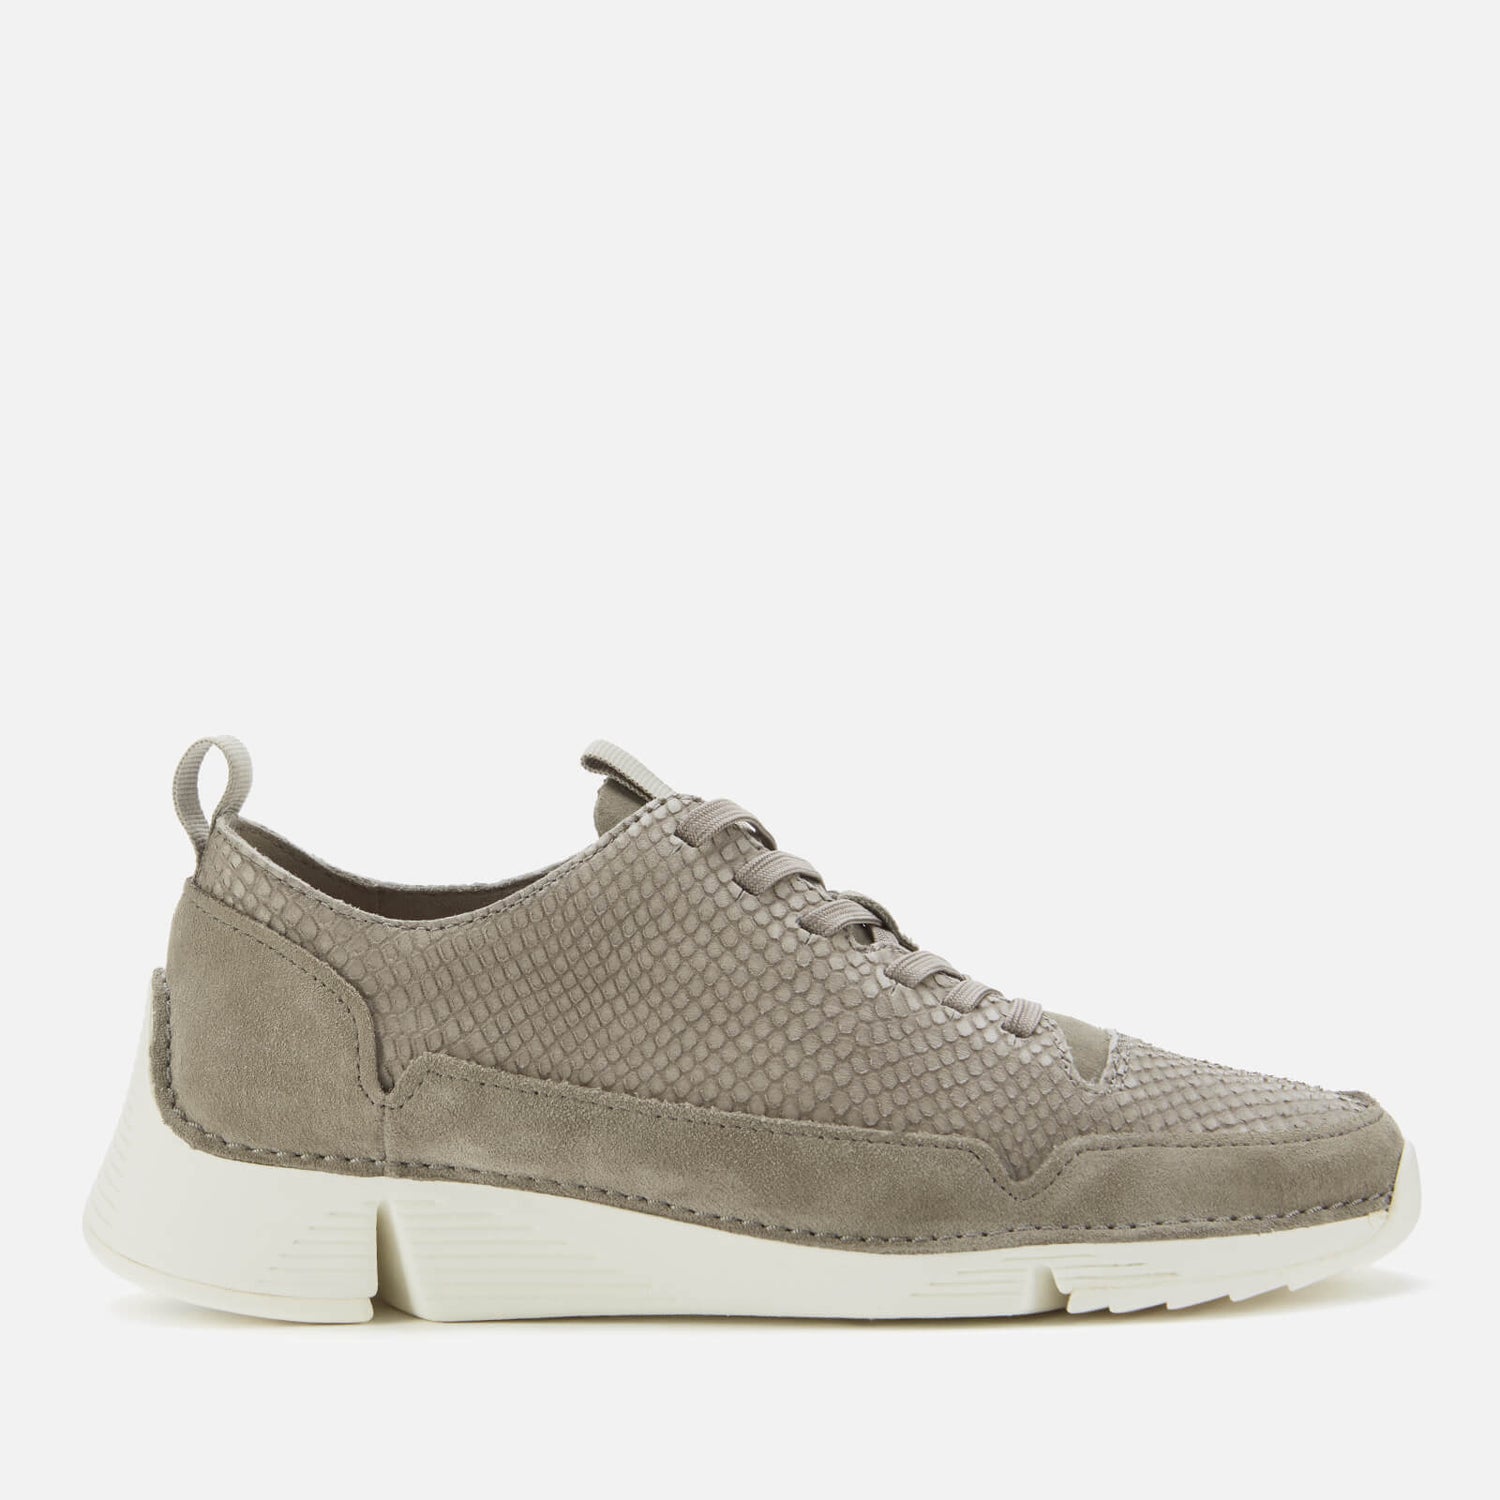 Clarks Women's Tri Spark Trainers - Sage Snake | FREE UK Delivery | Allsole